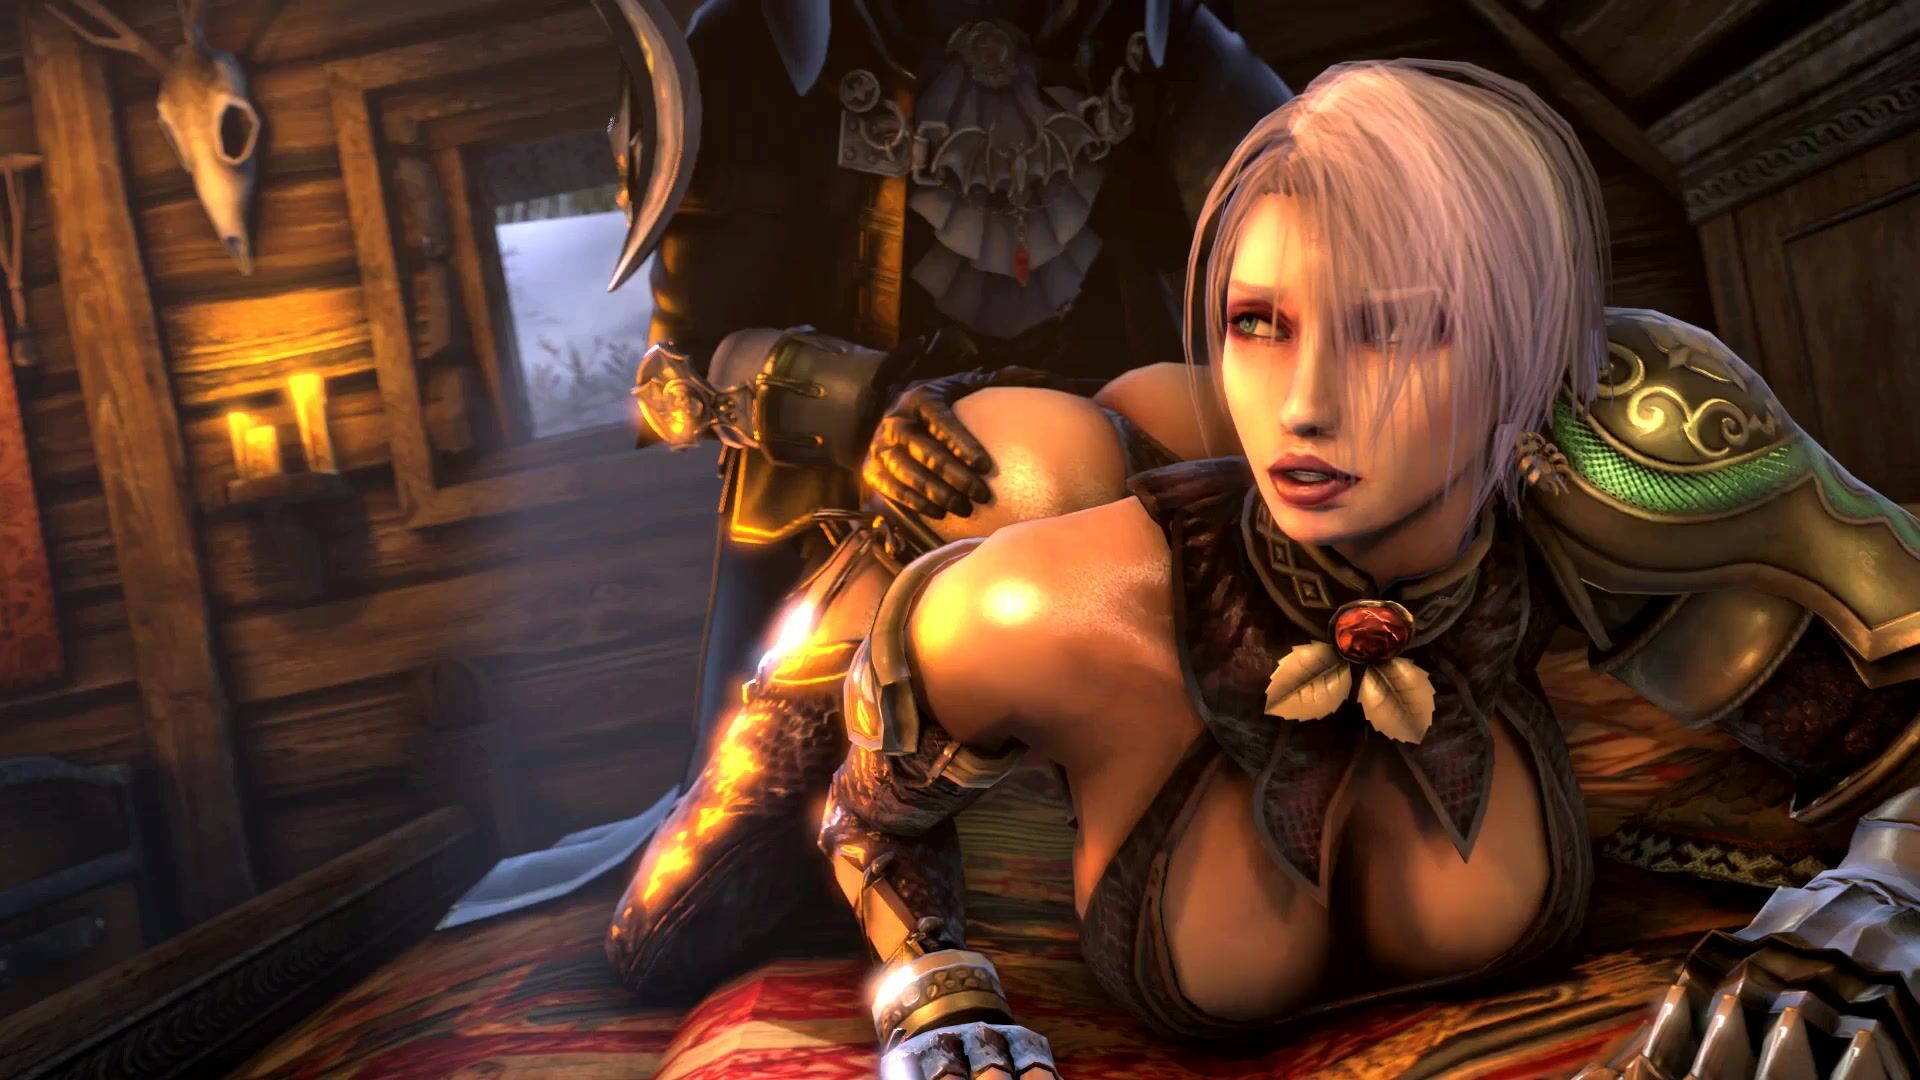 Pc Video Full Sexy Video - Sexy Ivy Valentine from Soul Calibur Gets Naughty in New Hentai Porn Video!  | AREA51.PORN